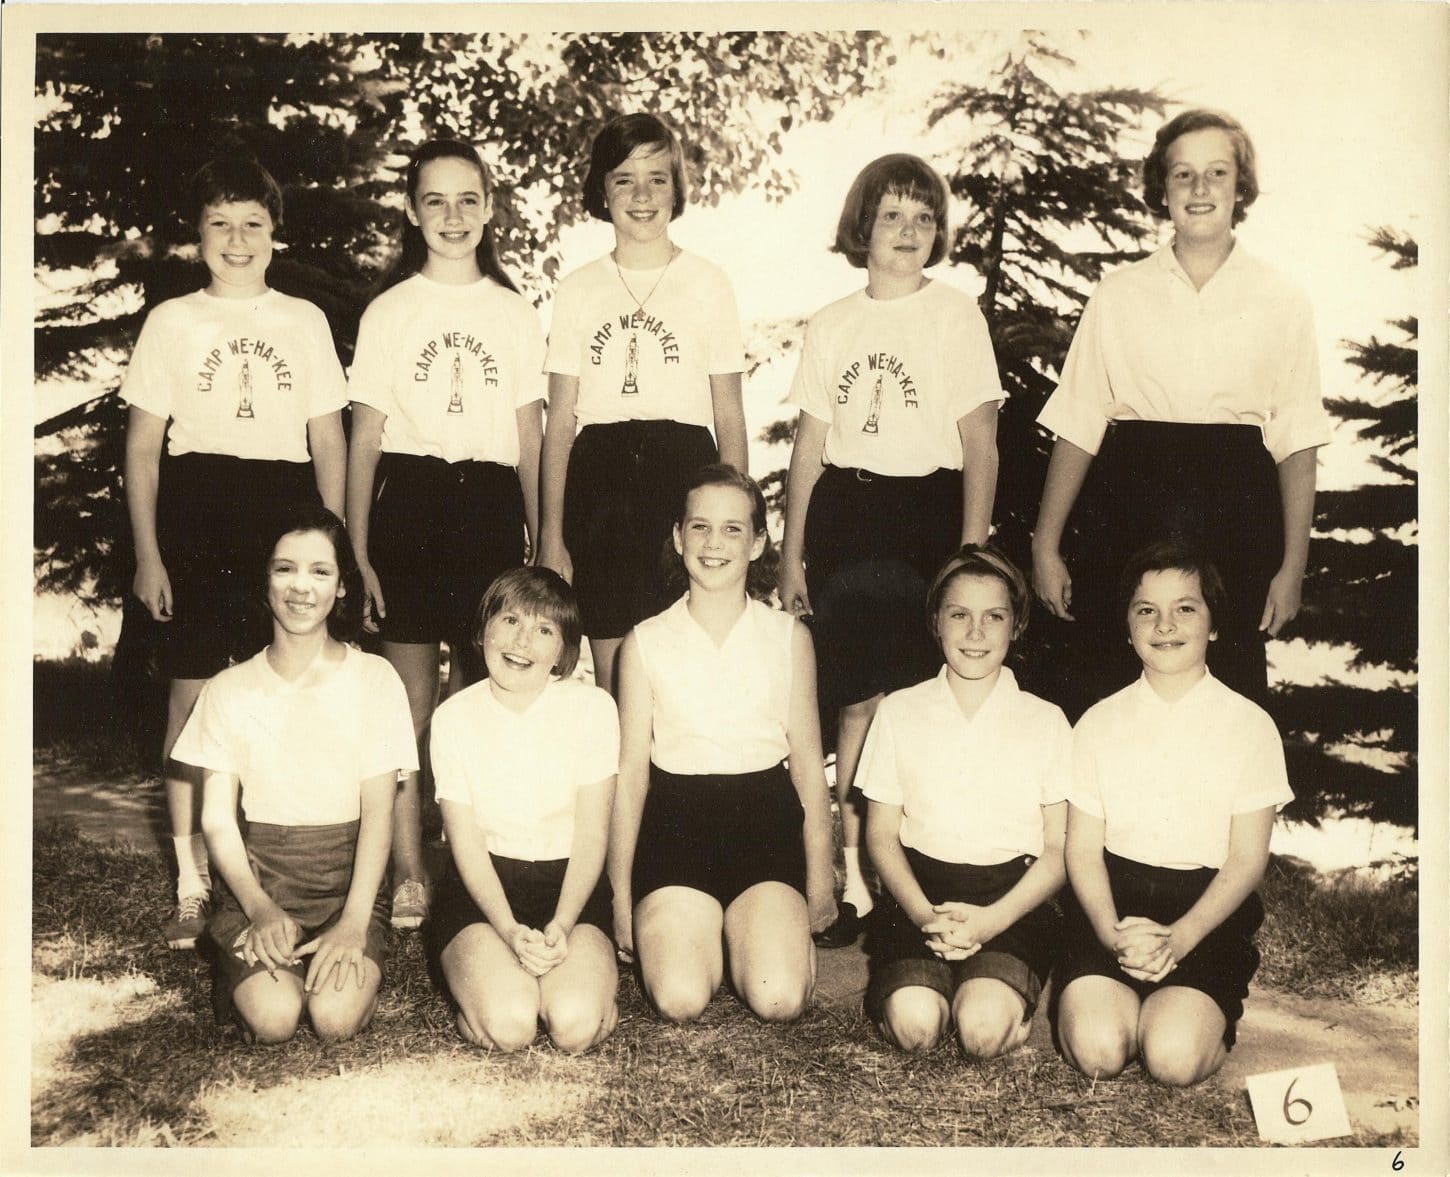 WeHaKee Camp for Girls in 1962